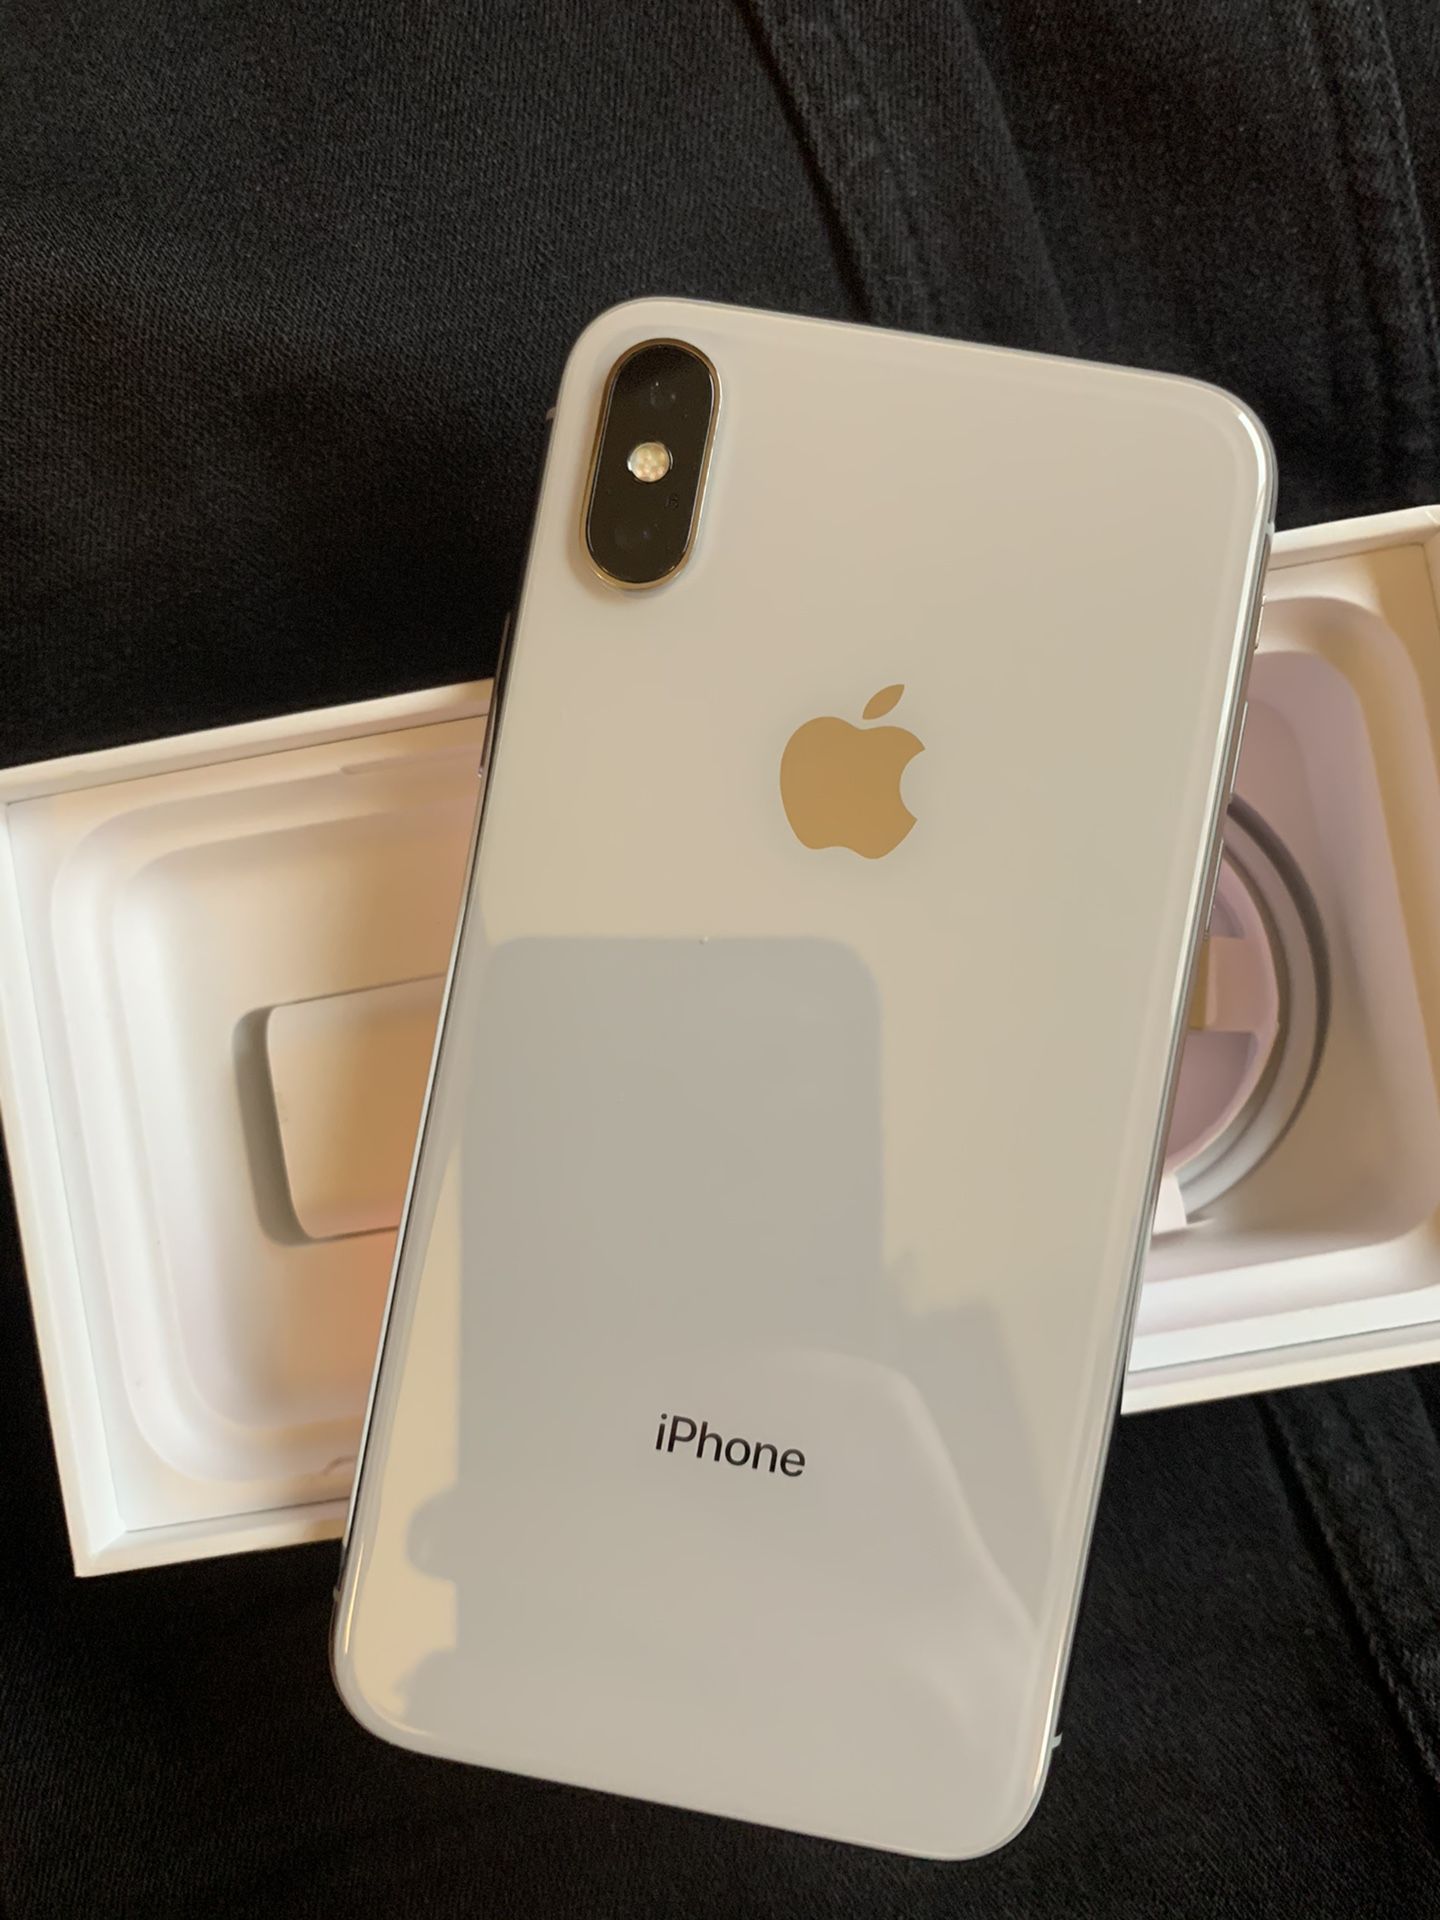 Iphone X Silver 64GB for Sprint or AT&T, H20